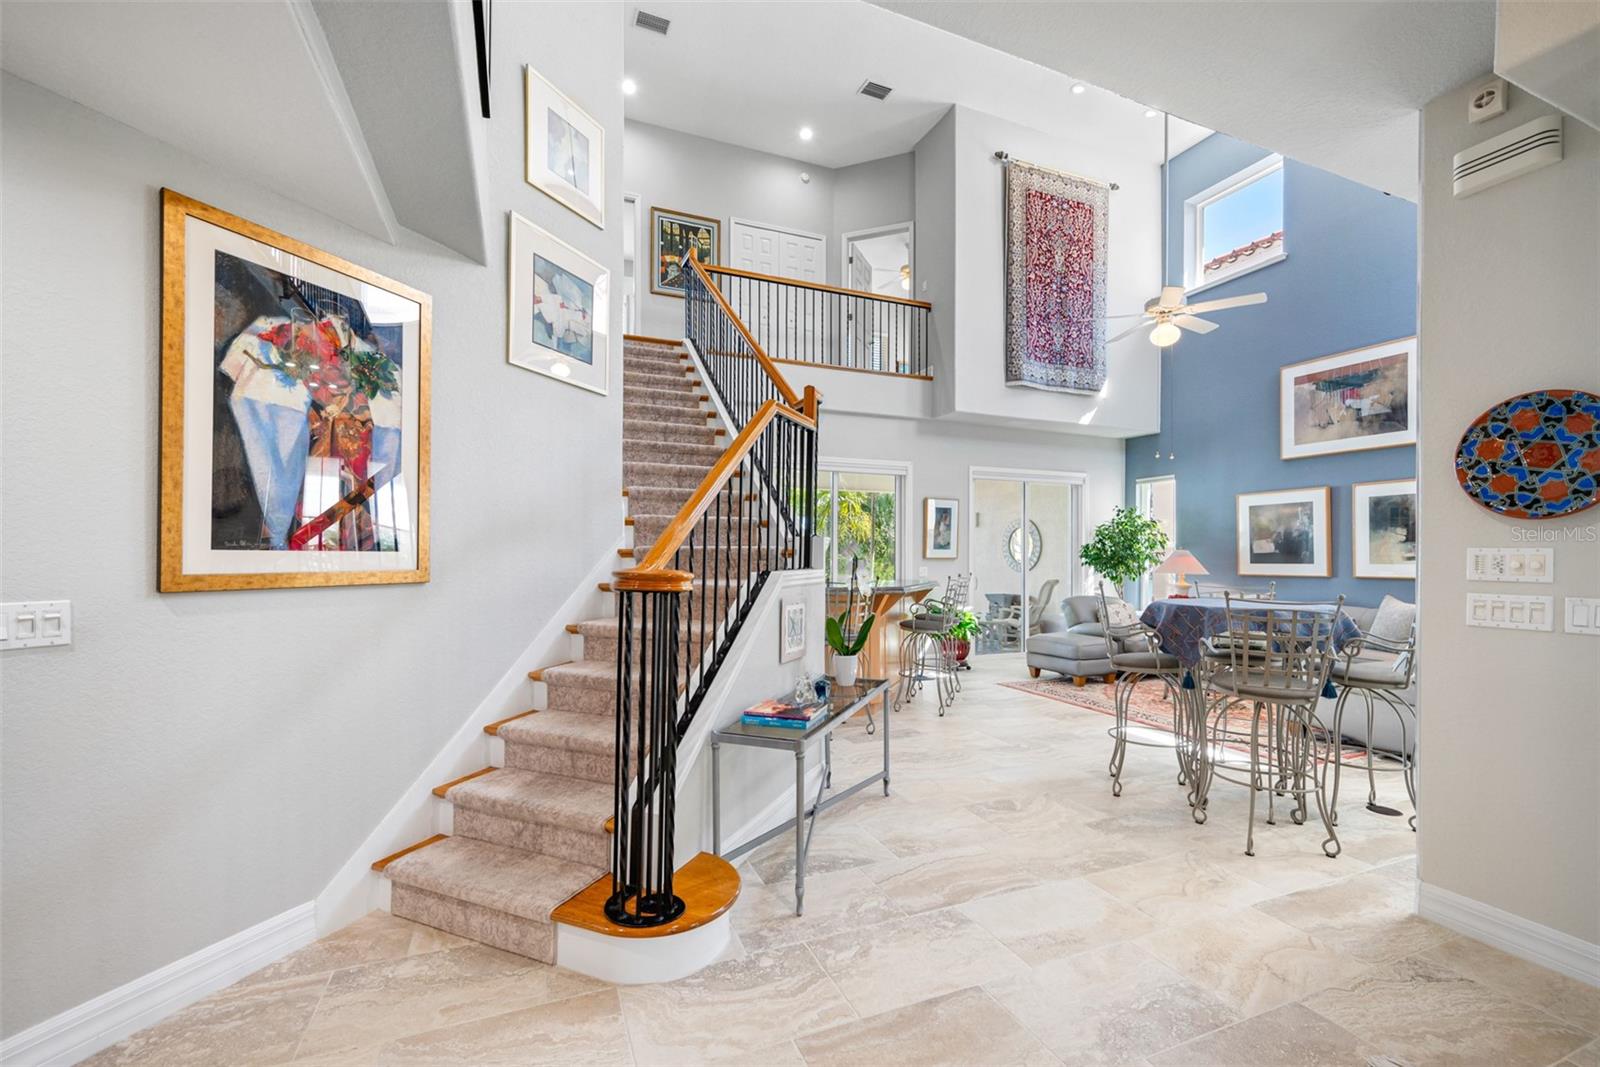 Entry foyer leads into living room with its soaring 21-ft high ceilings